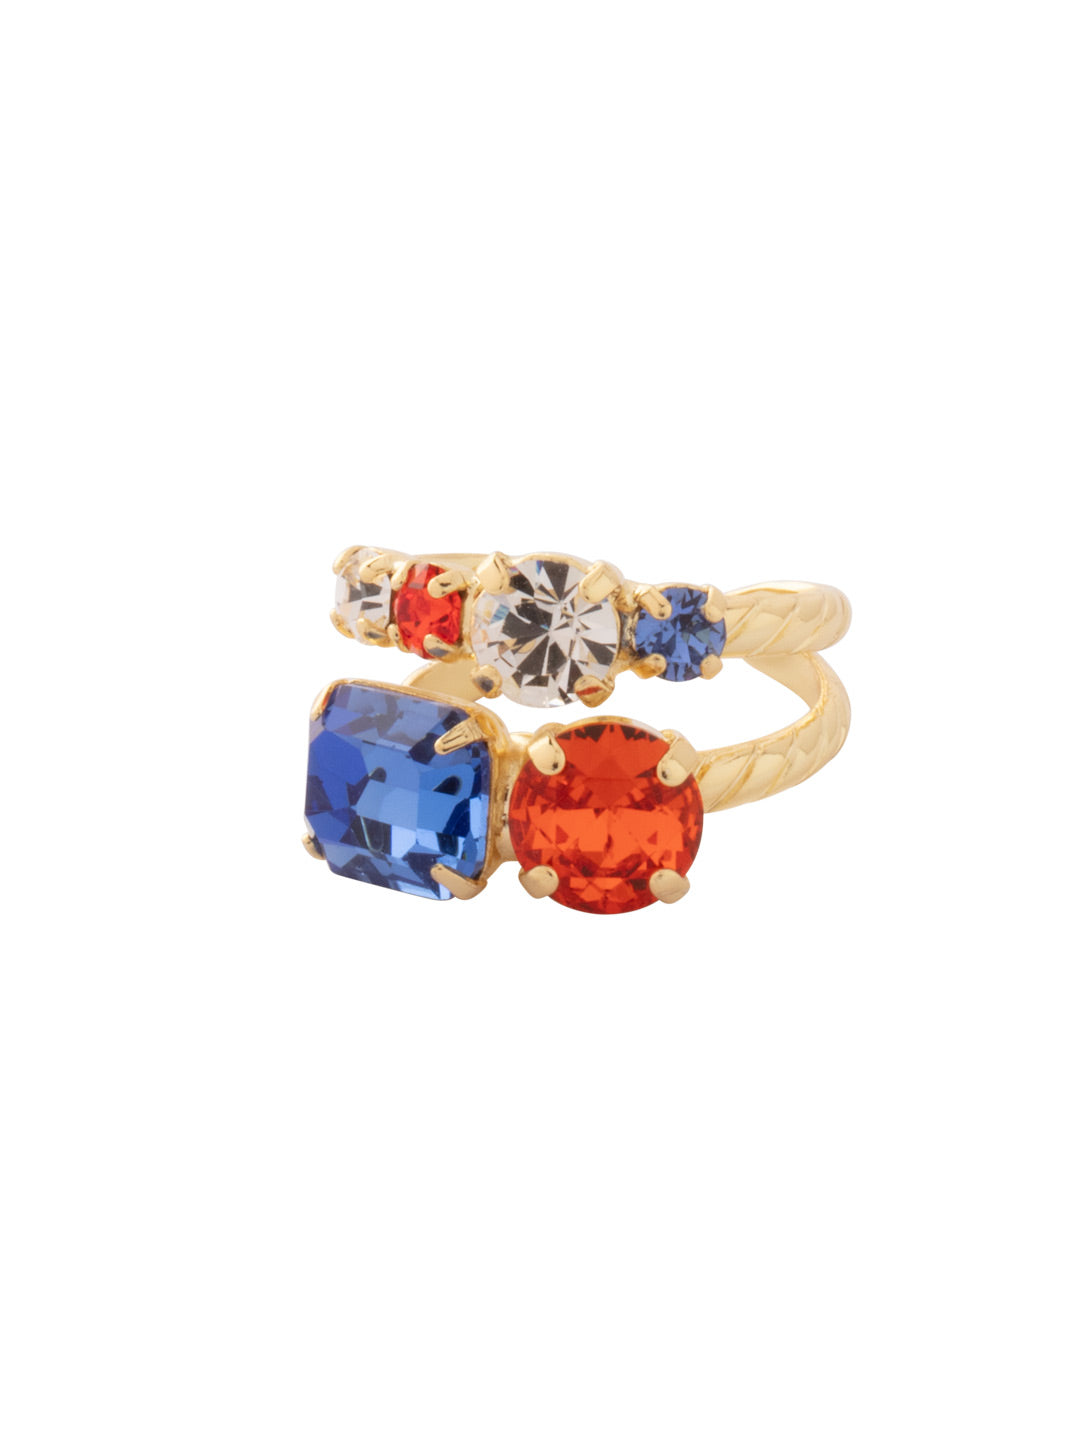 Miriam Stacked Ring - RFC44BGOCR - <p>The Miriam Stacked Ring features assorted cut crystals on an adjustable band. From Sorrelli's Orange Crush collection in our Bright Gold-tone finish.</p>